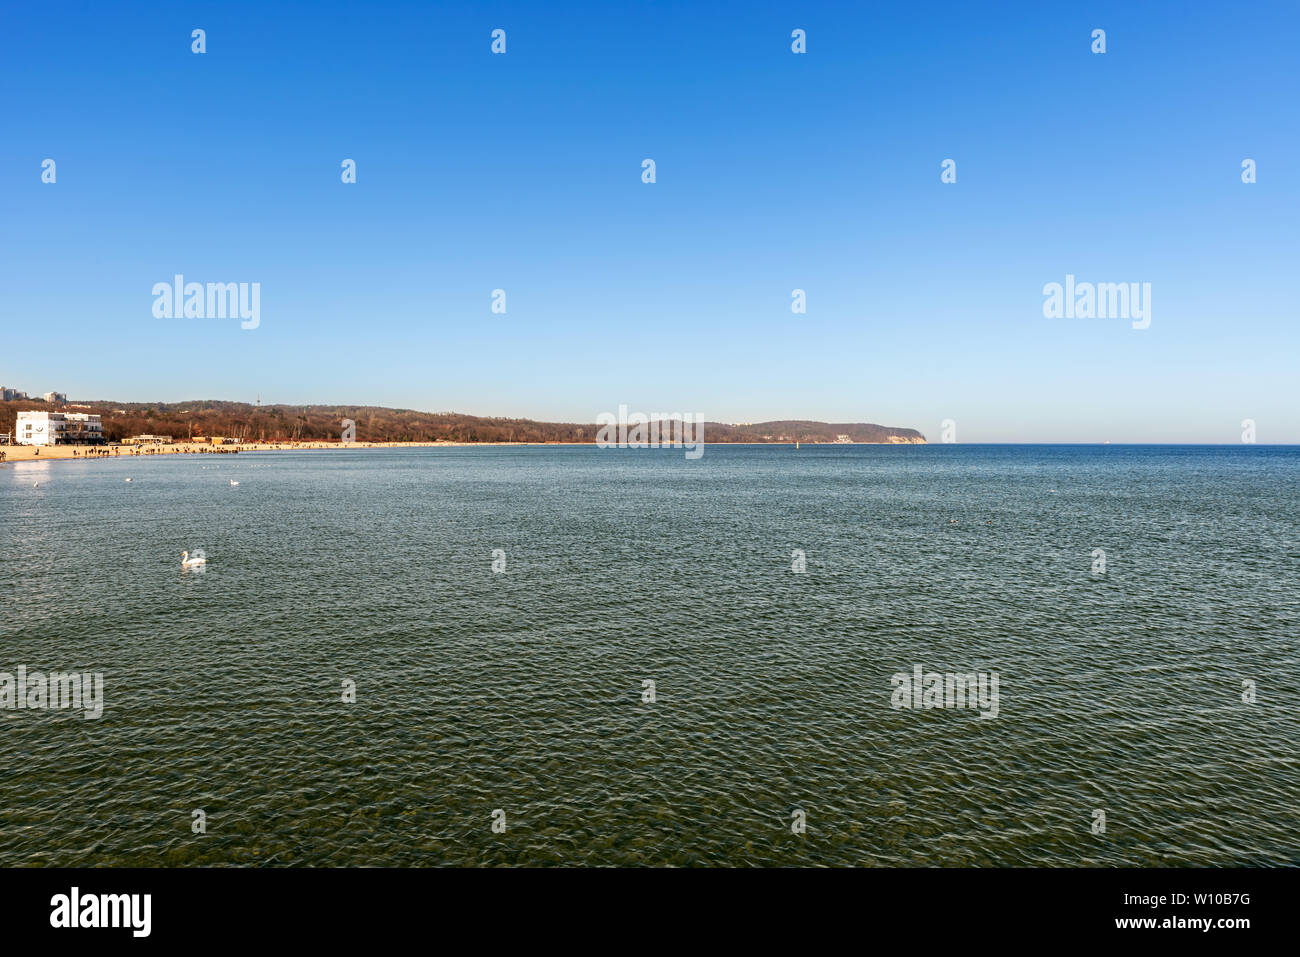 Landscape of the Baltic seaside with beaches as viewed from the pier in Sopot, Poland. Stock Photo